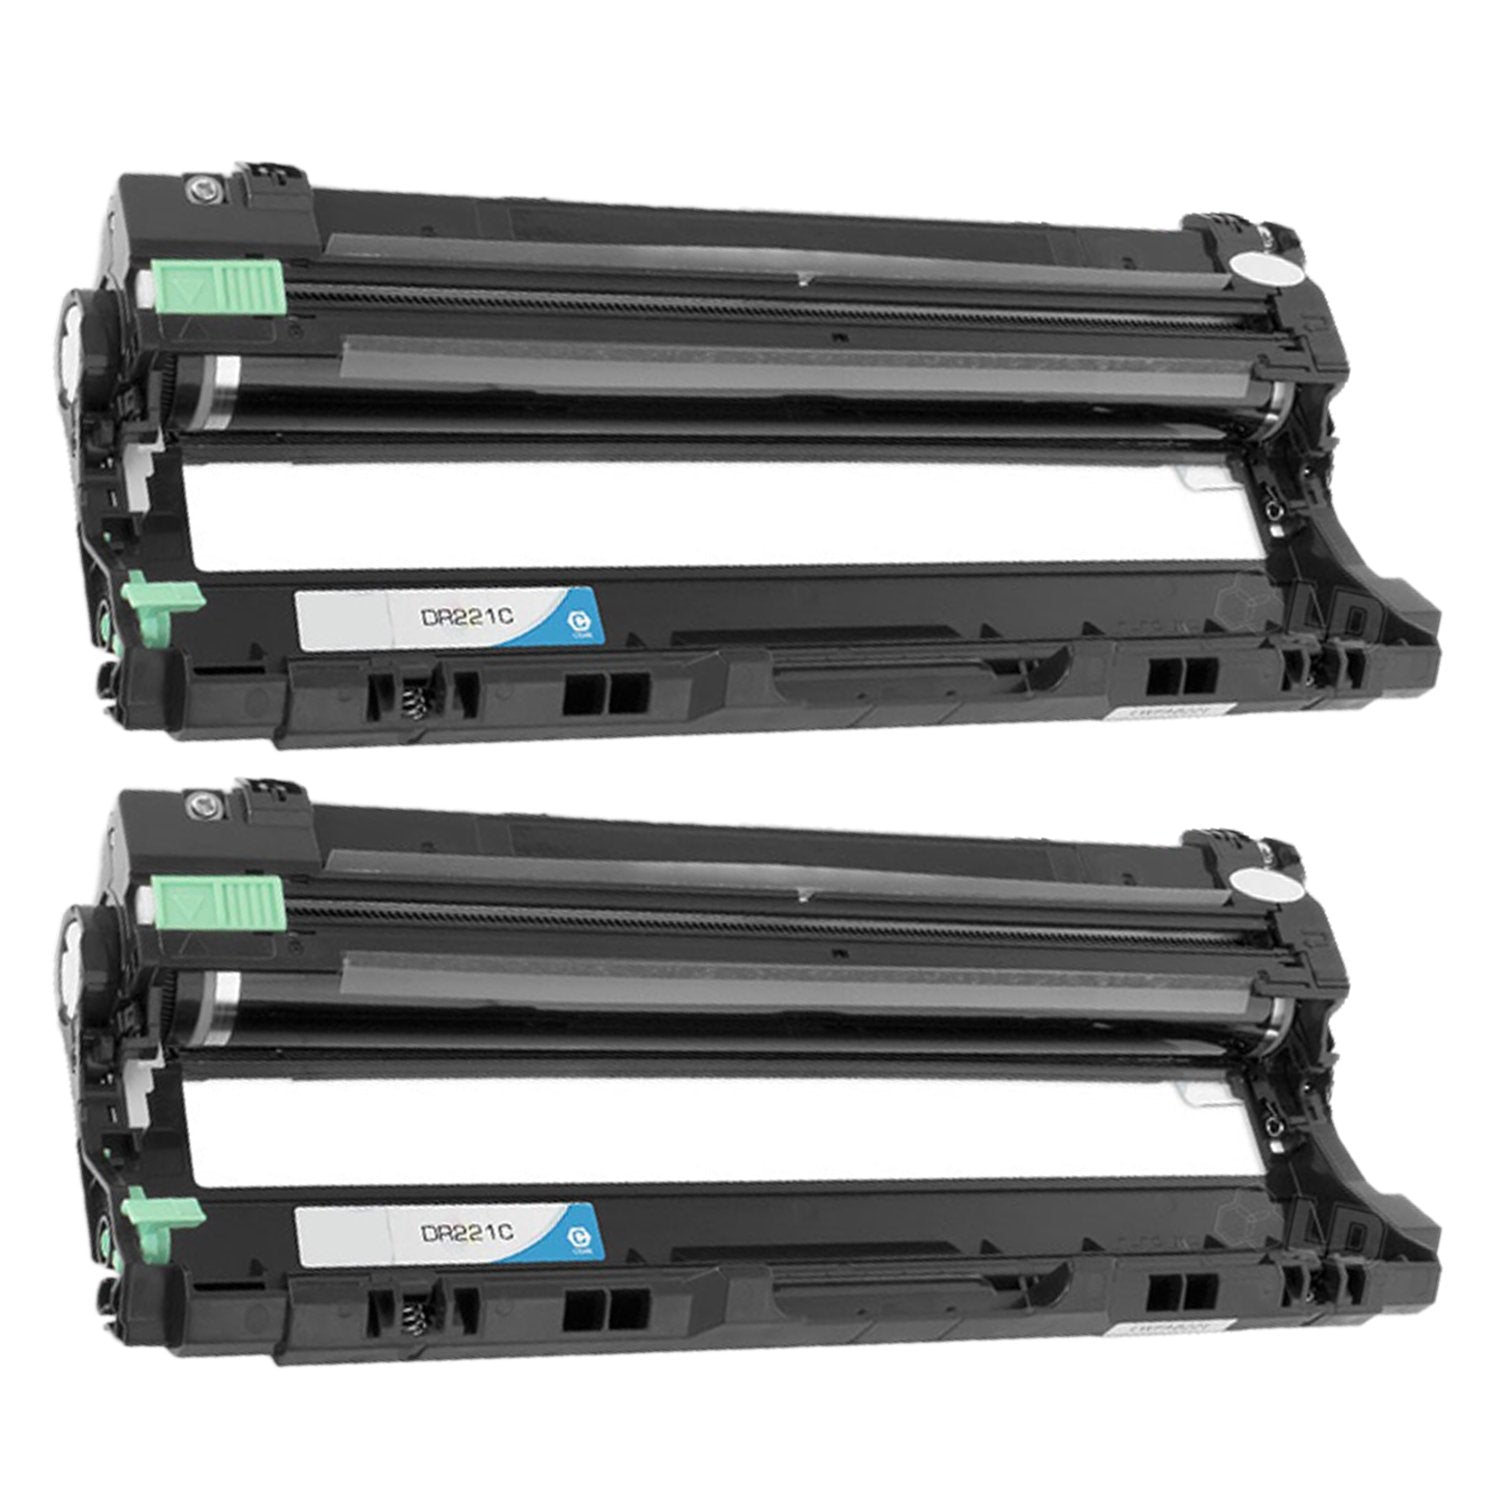 Absolute Toner Compatible Brother DR221 Cyan Drum Unit Toner Cartridge | Absolute Toner Brother Toner Cartridges